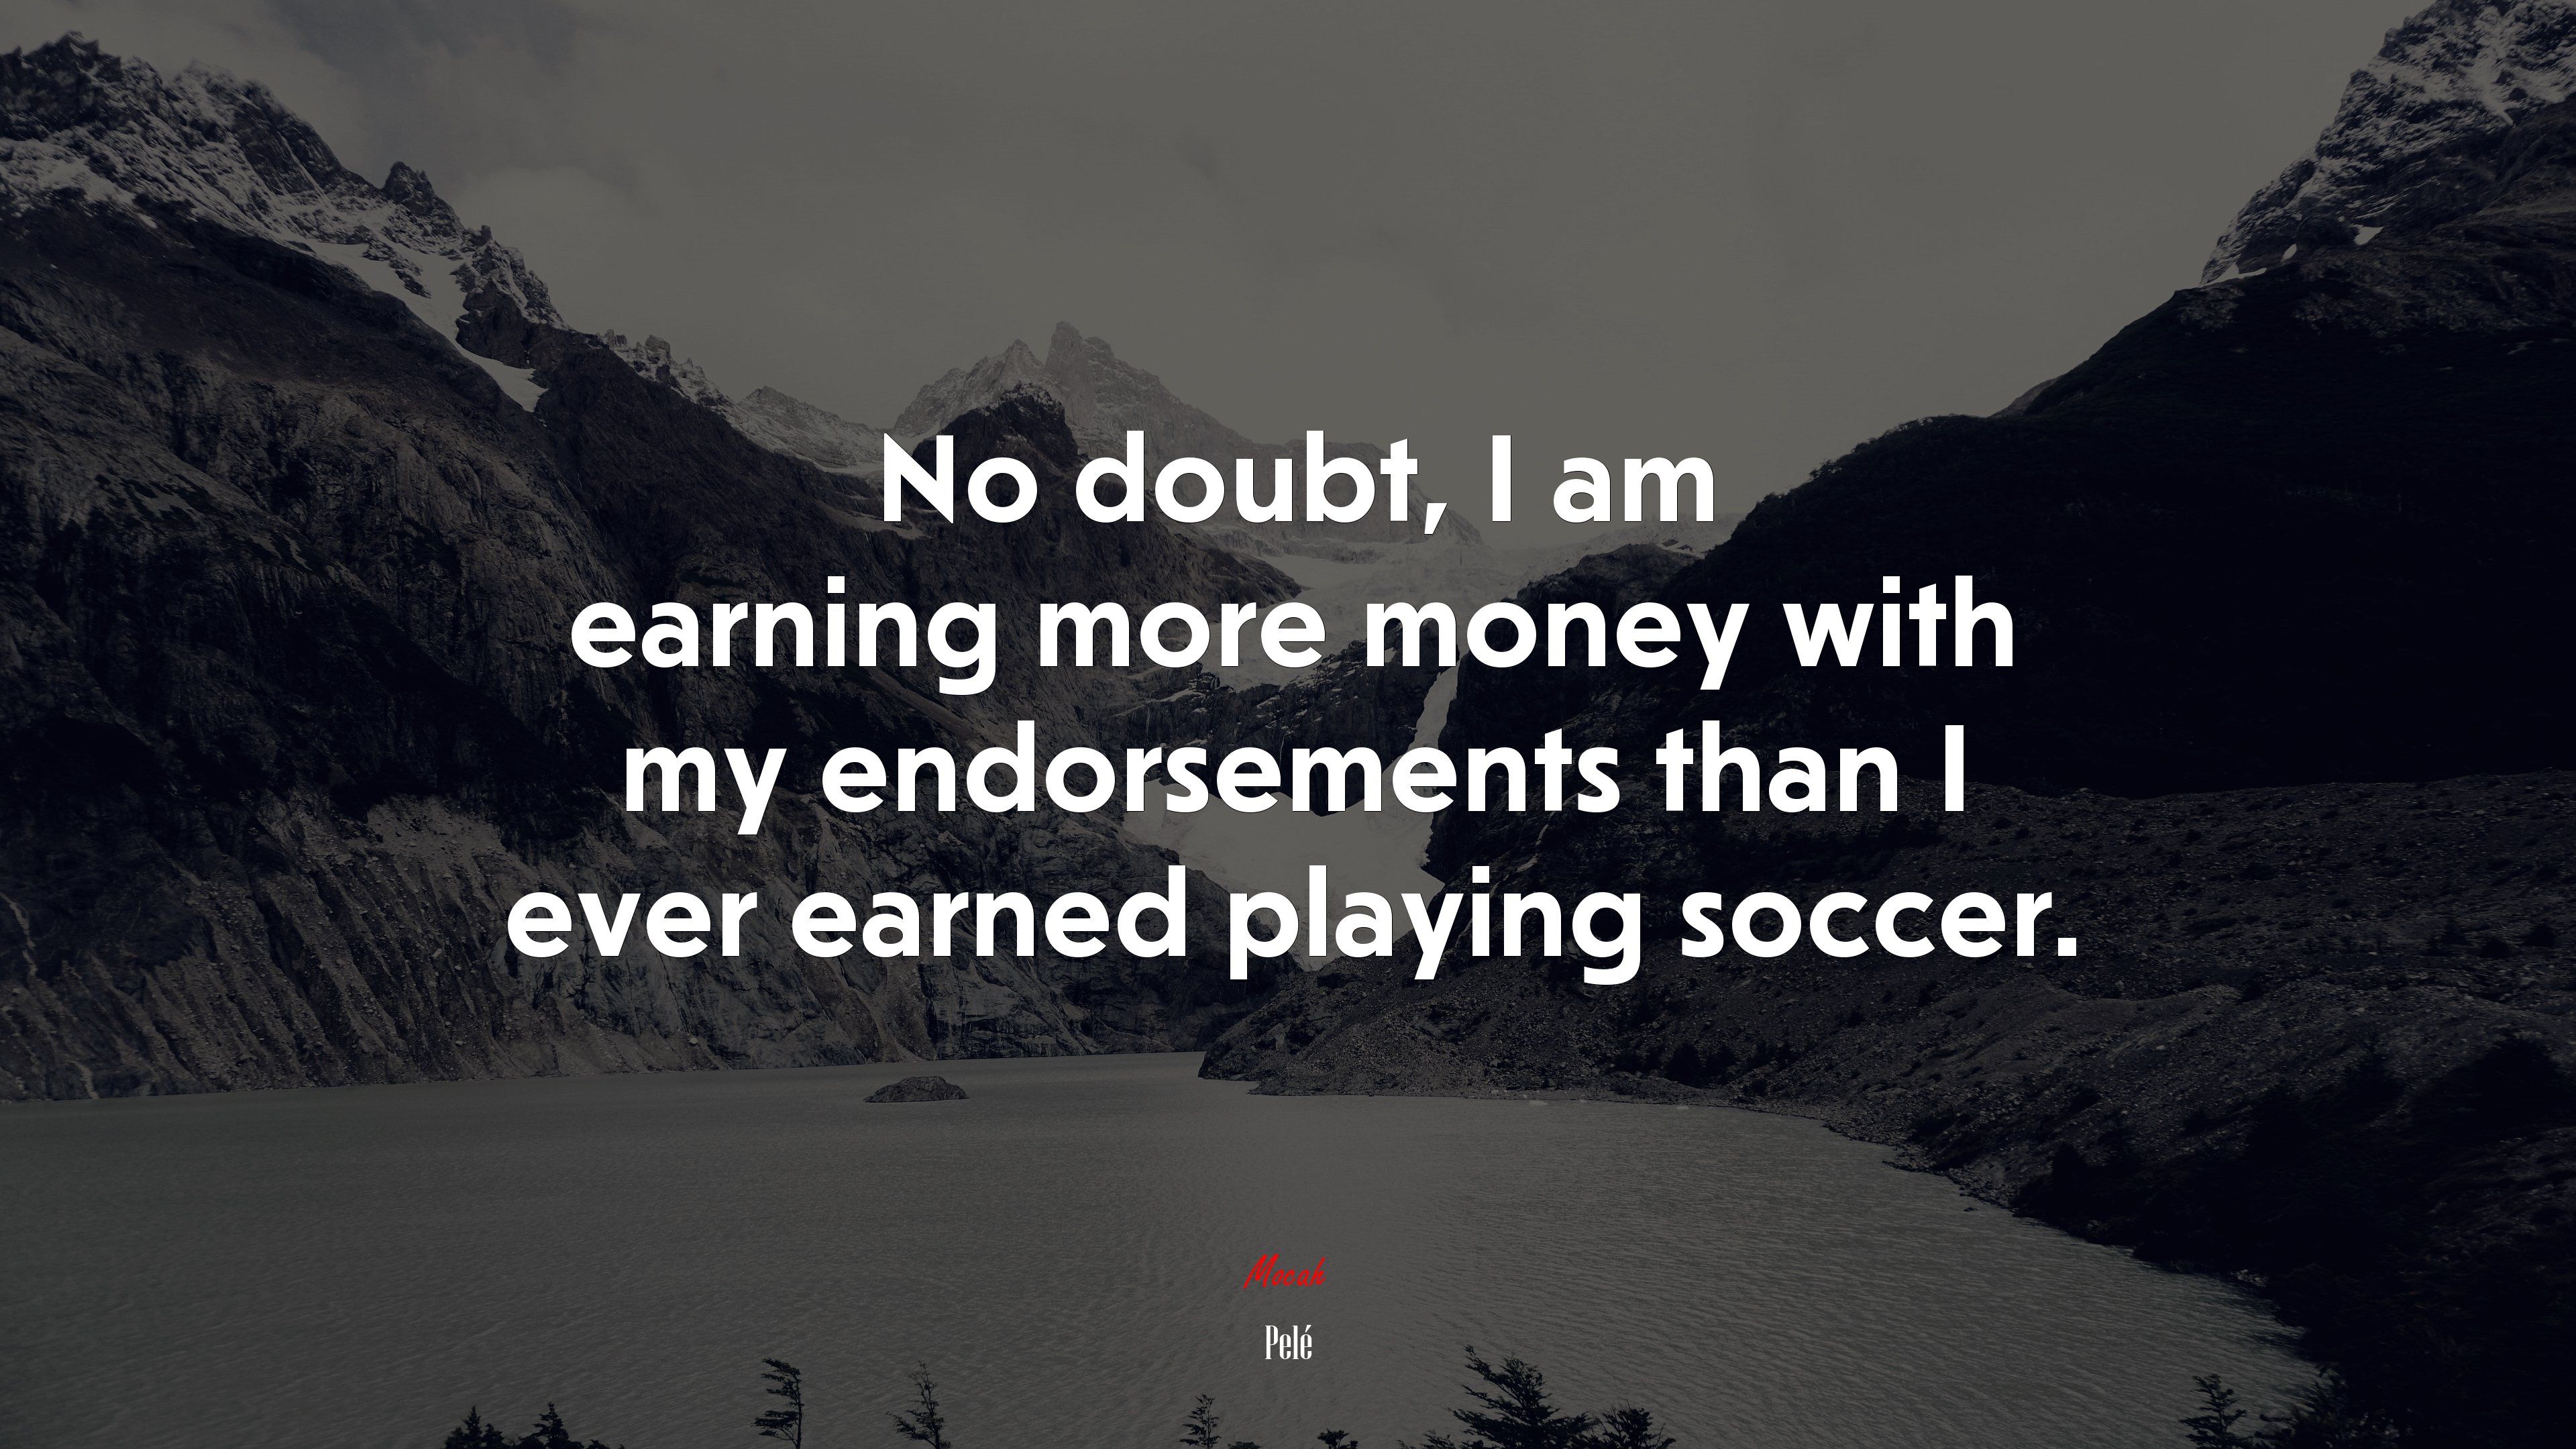 No doubt, I am earning more money with my endorsements than I ever earned playing soccer. Pelé quote, 4k wallpaper. Mocah.org HD Desktop Wallpaper